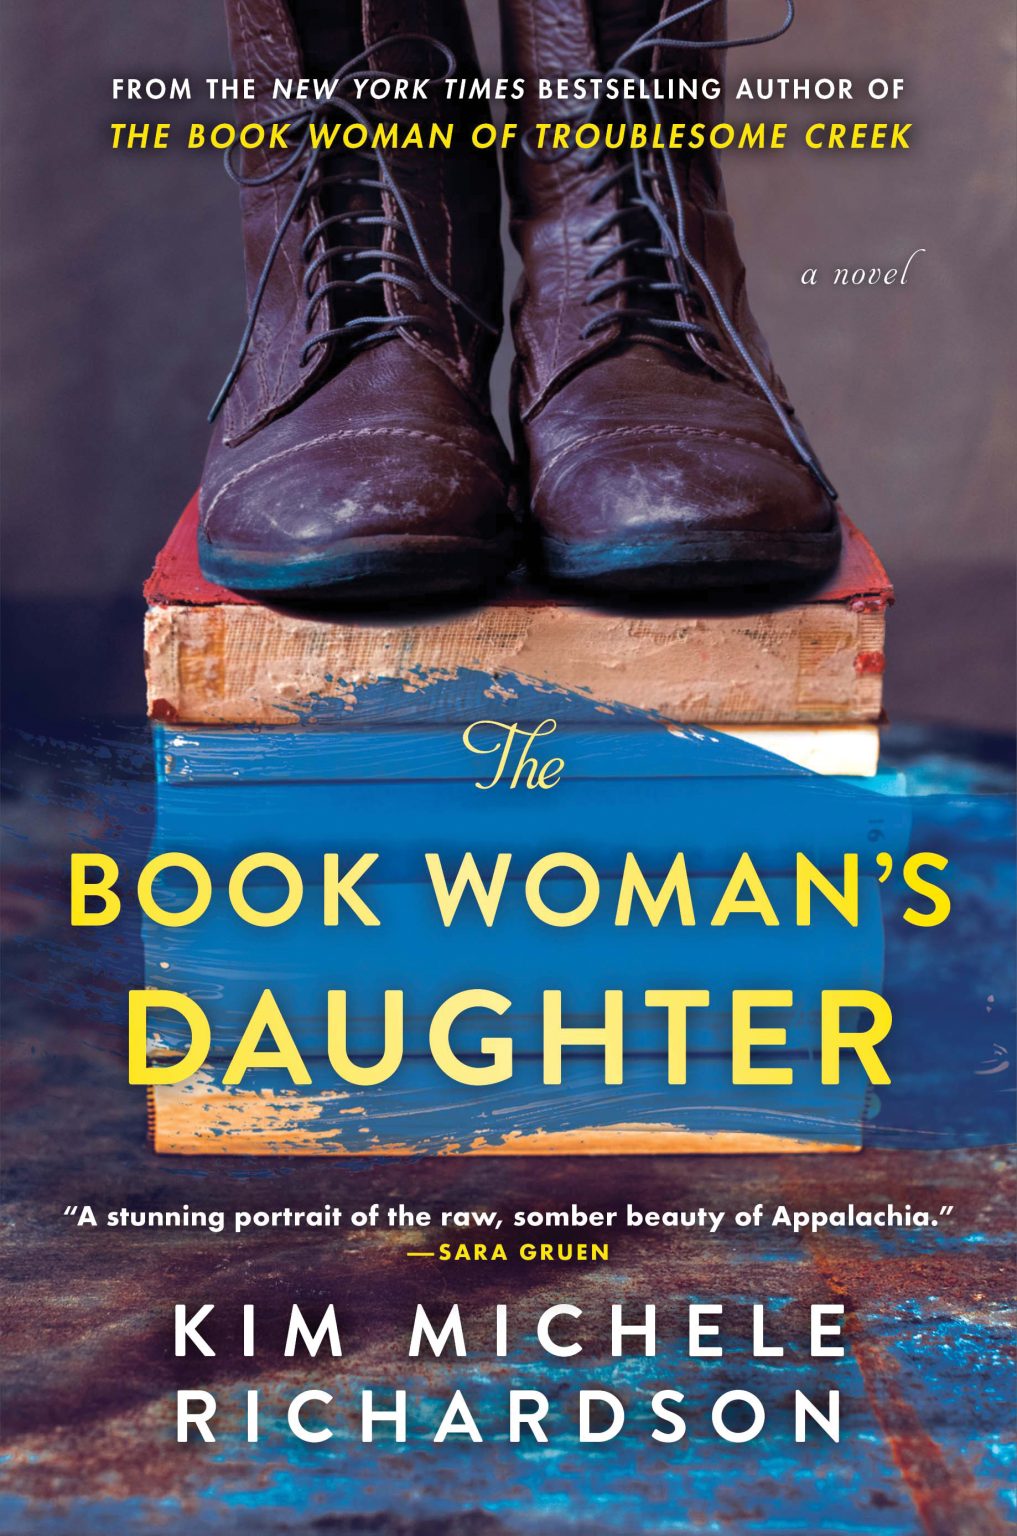 One of our recommended books is The Book Woman's Daughter by Kim Michele Richardson